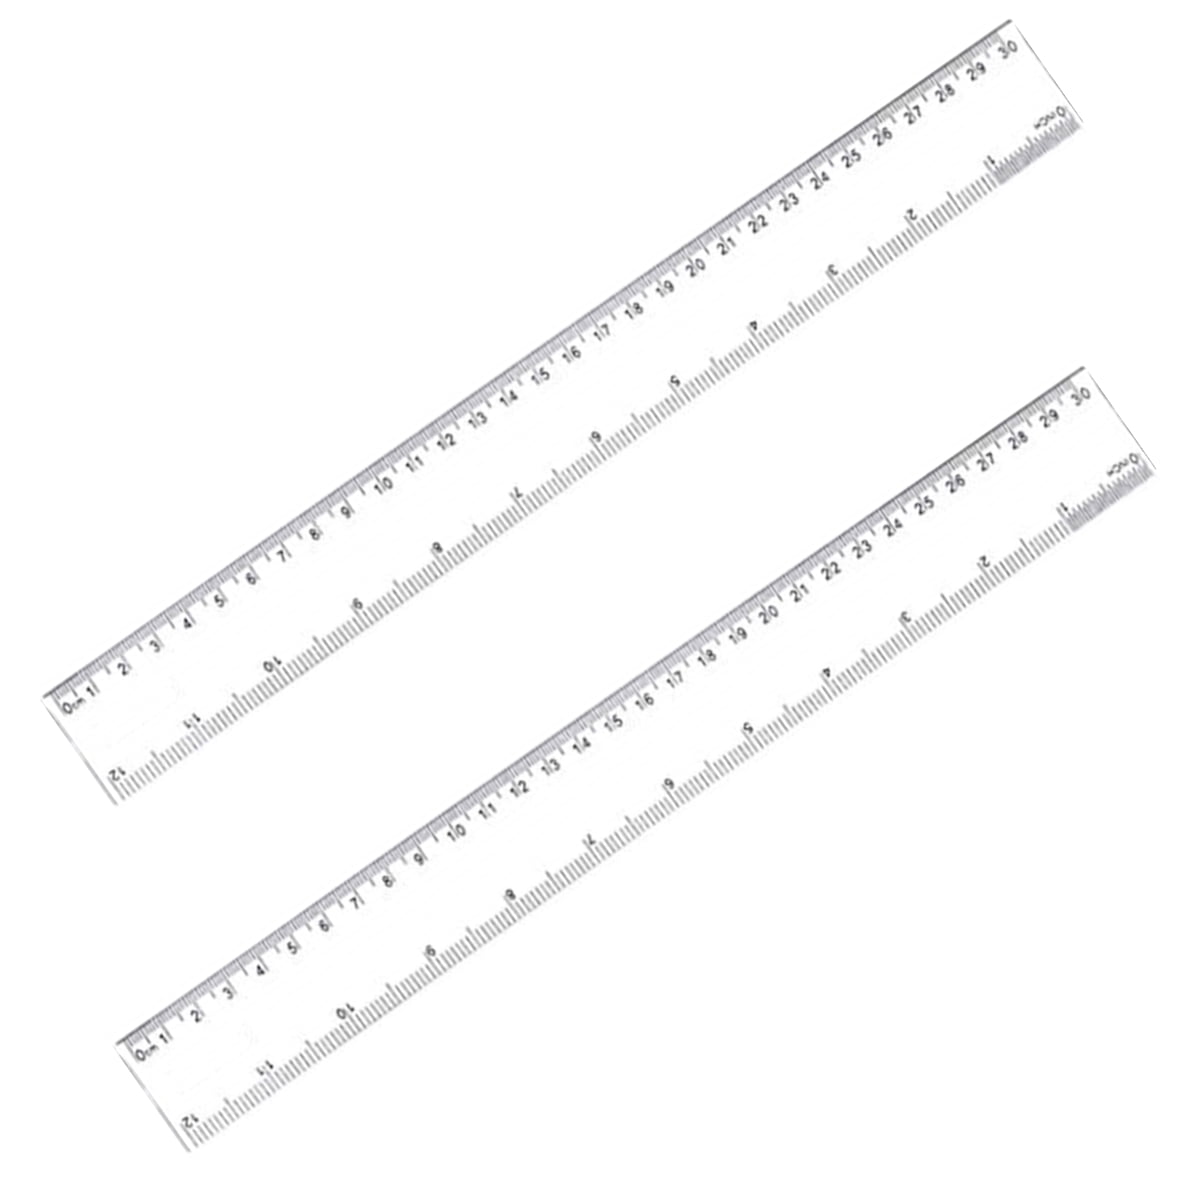 12 Inch 2 Pack Plastic Ruler Straight Ruler Clear See Through Measuring Acrylic Tool for Student School Office with Centimeters and Inches 